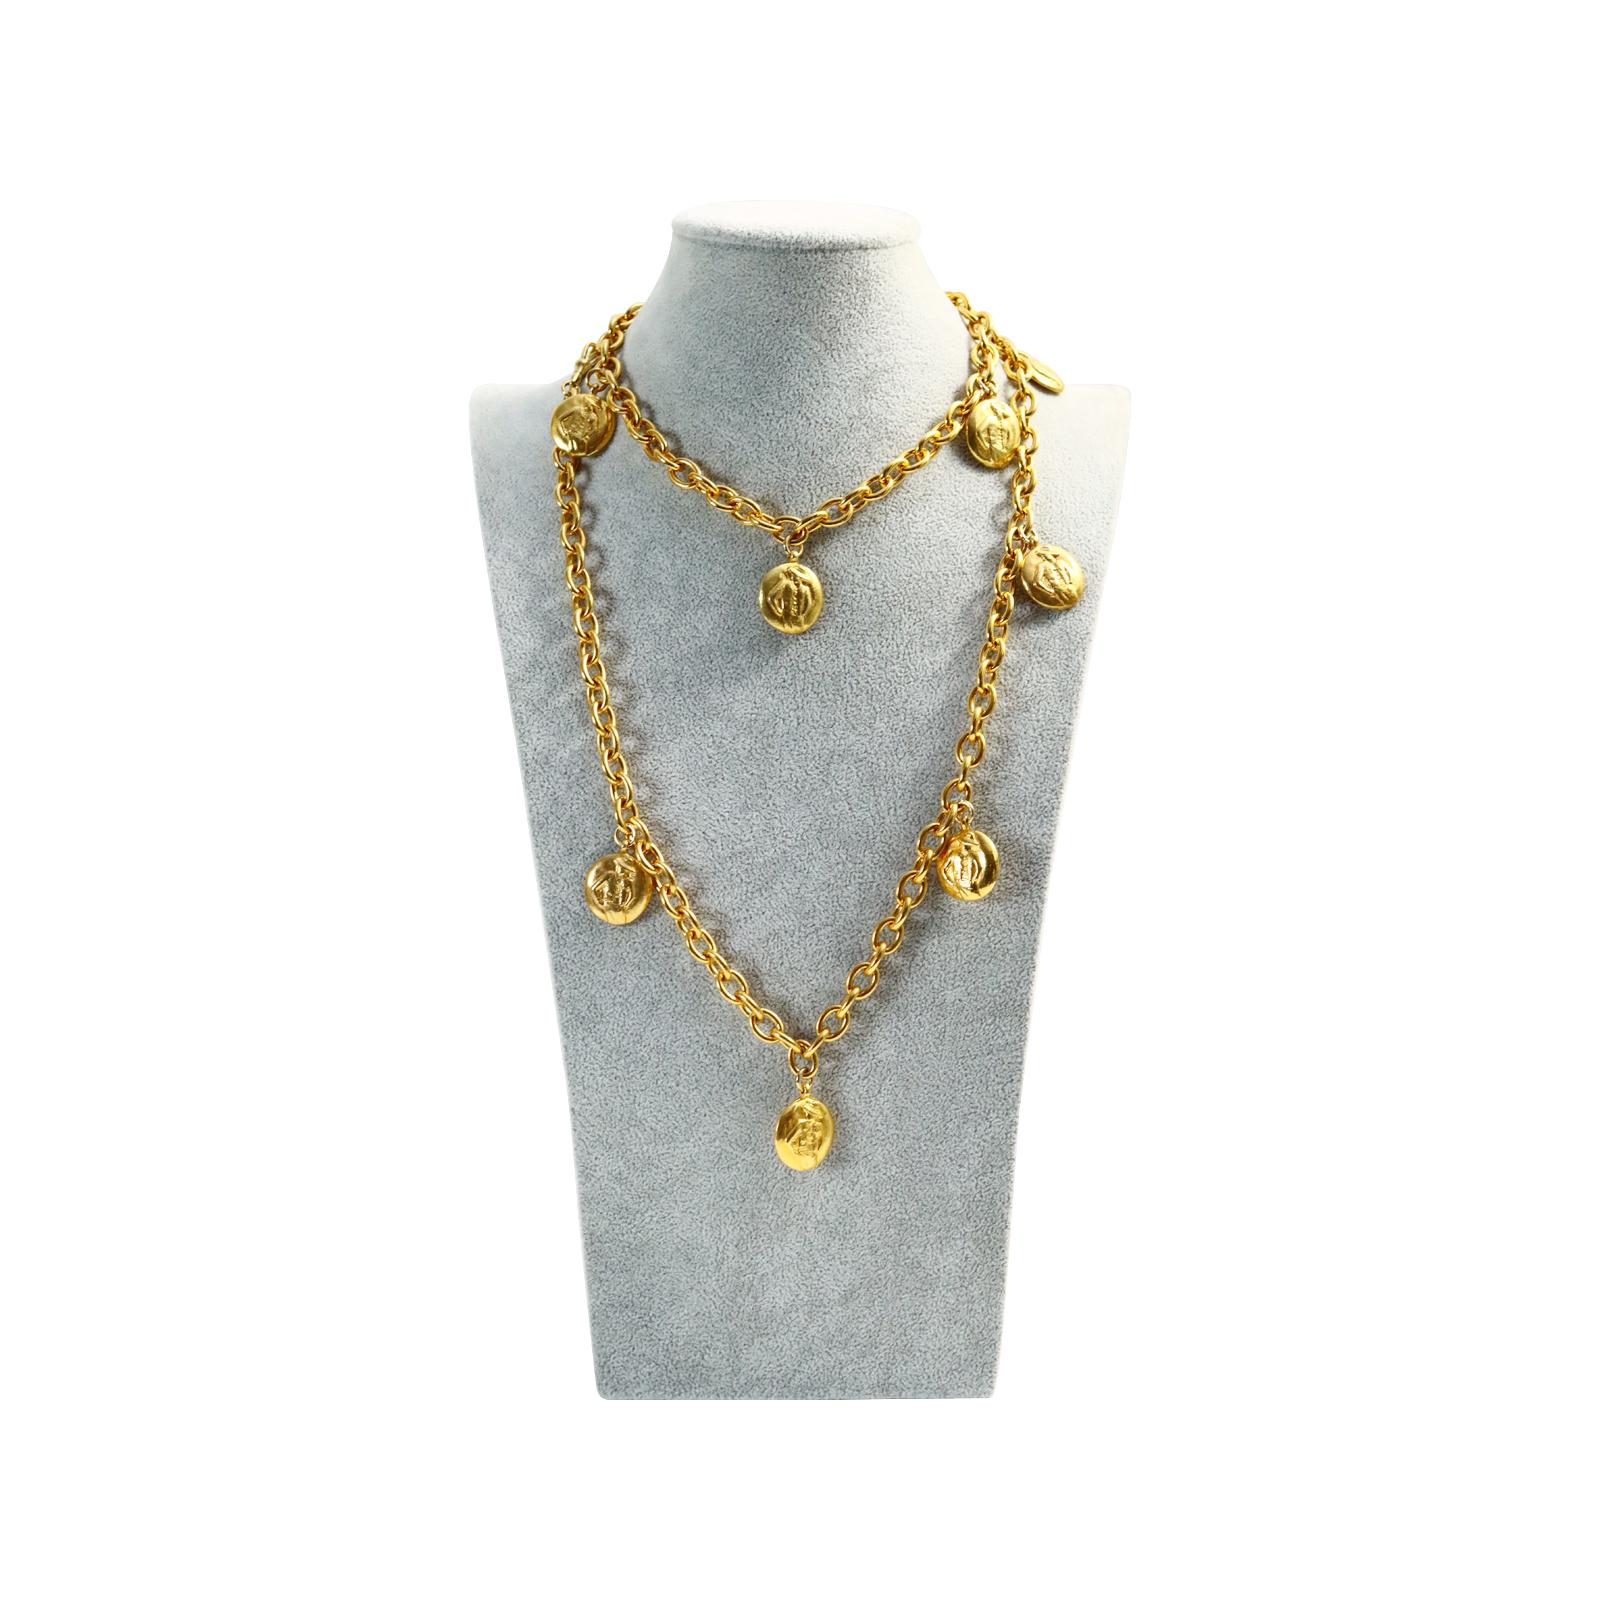 Vintage Chanel Gold Disc Chanel and Coco on Long Necklace Circa 1980s For Sale 6